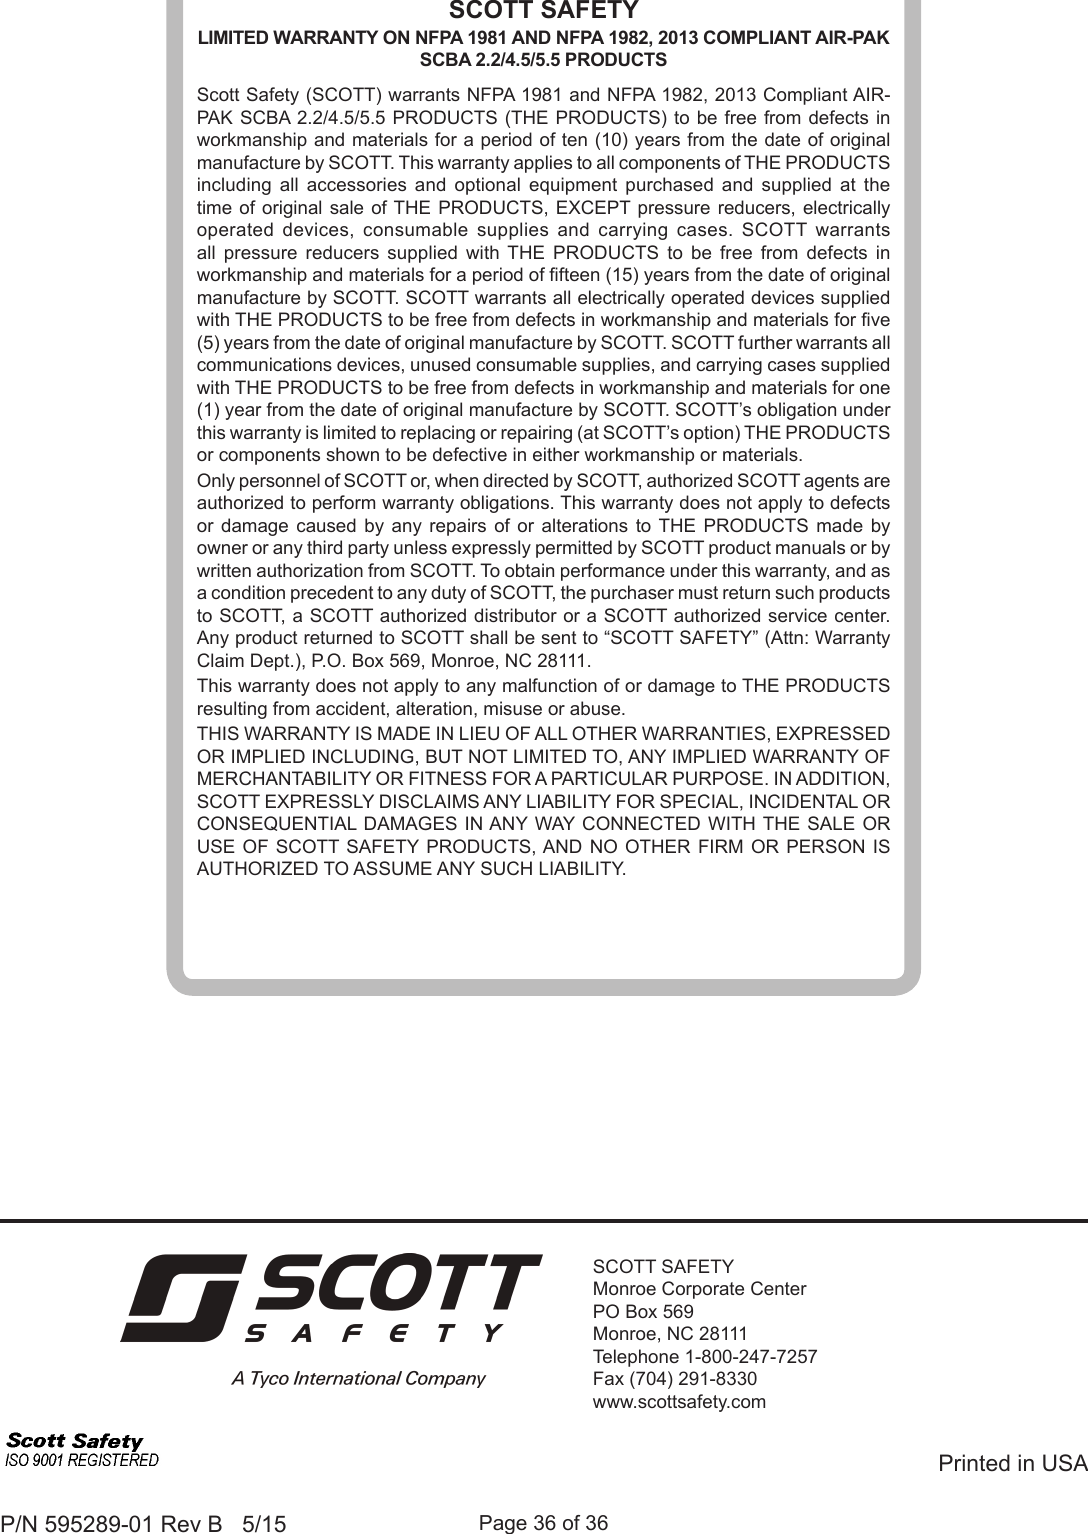 Page 36 of 36P/N 595289-01 Rev B   5/15SCOTT SAFETYMonroe Corporate CenterPO Box 569Monroe, NC 28111Telephone 1-800-247-7257Fax (704) 291-8330www.scottsafety.comPrinted in USASCOTT SAFETYLIMITED WARRANTY ON NFPA 1981 AND NFPA 1982, 2013 COMPLIANT AIR-PAK SCBA 2.2/4.5/5.5 PRODUCTSScott Safety (SCOTT) warrants NFPA 1981 and NFPA 1982, 2013 Compliant AIR-PAK SCBA 2.2/4.5/5.5 PRODUCTS (THE PRODUCTS) to be free from defects in workmanship and materials for a period of ten (10) years from the date of original manufacture by SCOTT. This warranty applies to all components of THE PRODUCTS including all accessories and optional equipment purchased and supplied at the time of original sale of THE PRODUCTS, EXCEPT pressure reducers, electrically operated devices, consumable supplies and carrying cases. SCOTT warrants all pressure reducers supplied with THE PRODUCTS to be free from defects in workmanship and materials for a period of fteen (15) years from the date of original manufacture by SCOTT. SCOTT warrants all electrically operated devices supplied with THE PRODUCTS to be free from defects in workmanship and materials for ve (5) years from the date of original manufacture by SCOTT. SCOTT further warrants all communications devices, unused consumable supplies, and carrying cases supplied with THE PRODUCTS to be free from defects in workmanship and materials for one (1) year from the date of original manufacture by SCOTT. SCOTT’s obligation under this warranty is limited to replacing or repairing (at SCOTT’s option) THE PRODUCTS or components shown to be defective in either workmanship or materials.Only personnel of SCOTT or, when directed by SCOTT, authorized SCOTT agents are authorized to perform warranty obligations. This warranty does not apply to defects or damage caused by any repairs of or alterations to THE PRODUCTS made by owner or any third party unless expressly permitted by SCOTT product manuals or by written authorization from SCOTT. To obtain performance under this warranty, and as a condition precedent to any duty of SCOTT, the purchaser must return such products to SCOTT, a SCOTT authorized distributor or a SCOTT authorized service center. Any product returned to SCOTT shall be sent to “SCOTT SAFETY” (Attn: Warranty Claim Dept.), P.O. Box 569, Monroe, NC 28111.This warranty does not apply to any malfunction of or damage to THE PRODUCTS resulting from accident, alteration, misuse or abuse.THIS WARRANTY IS MADE IN LIEU OF ALL OTHER WARRANTIES, EXPRESSED OR IMPLIED INCLUDING, BUT NOT LIMITED TO, ANY IMPLIED WARRANTY OF MERCHANTABILITY OR FITNESS FOR A PARTICULAR PURPOSE. IN ADDITION, SCOTT EXPRESSLY DISCLAIMS ANY LIABILITY FOR SPECIAL, INCIDENTAL OR CONSEQUENTIAL DAMAGES IN ANY WAY CONNECTED WITH THE SALE OR USE OF SCOTT SAFETY PRODUCTS, AND NO OTHER FIRM OR PERSON IS AUTHORIZED TO ASSUME ANY SUCH LIABILITY.